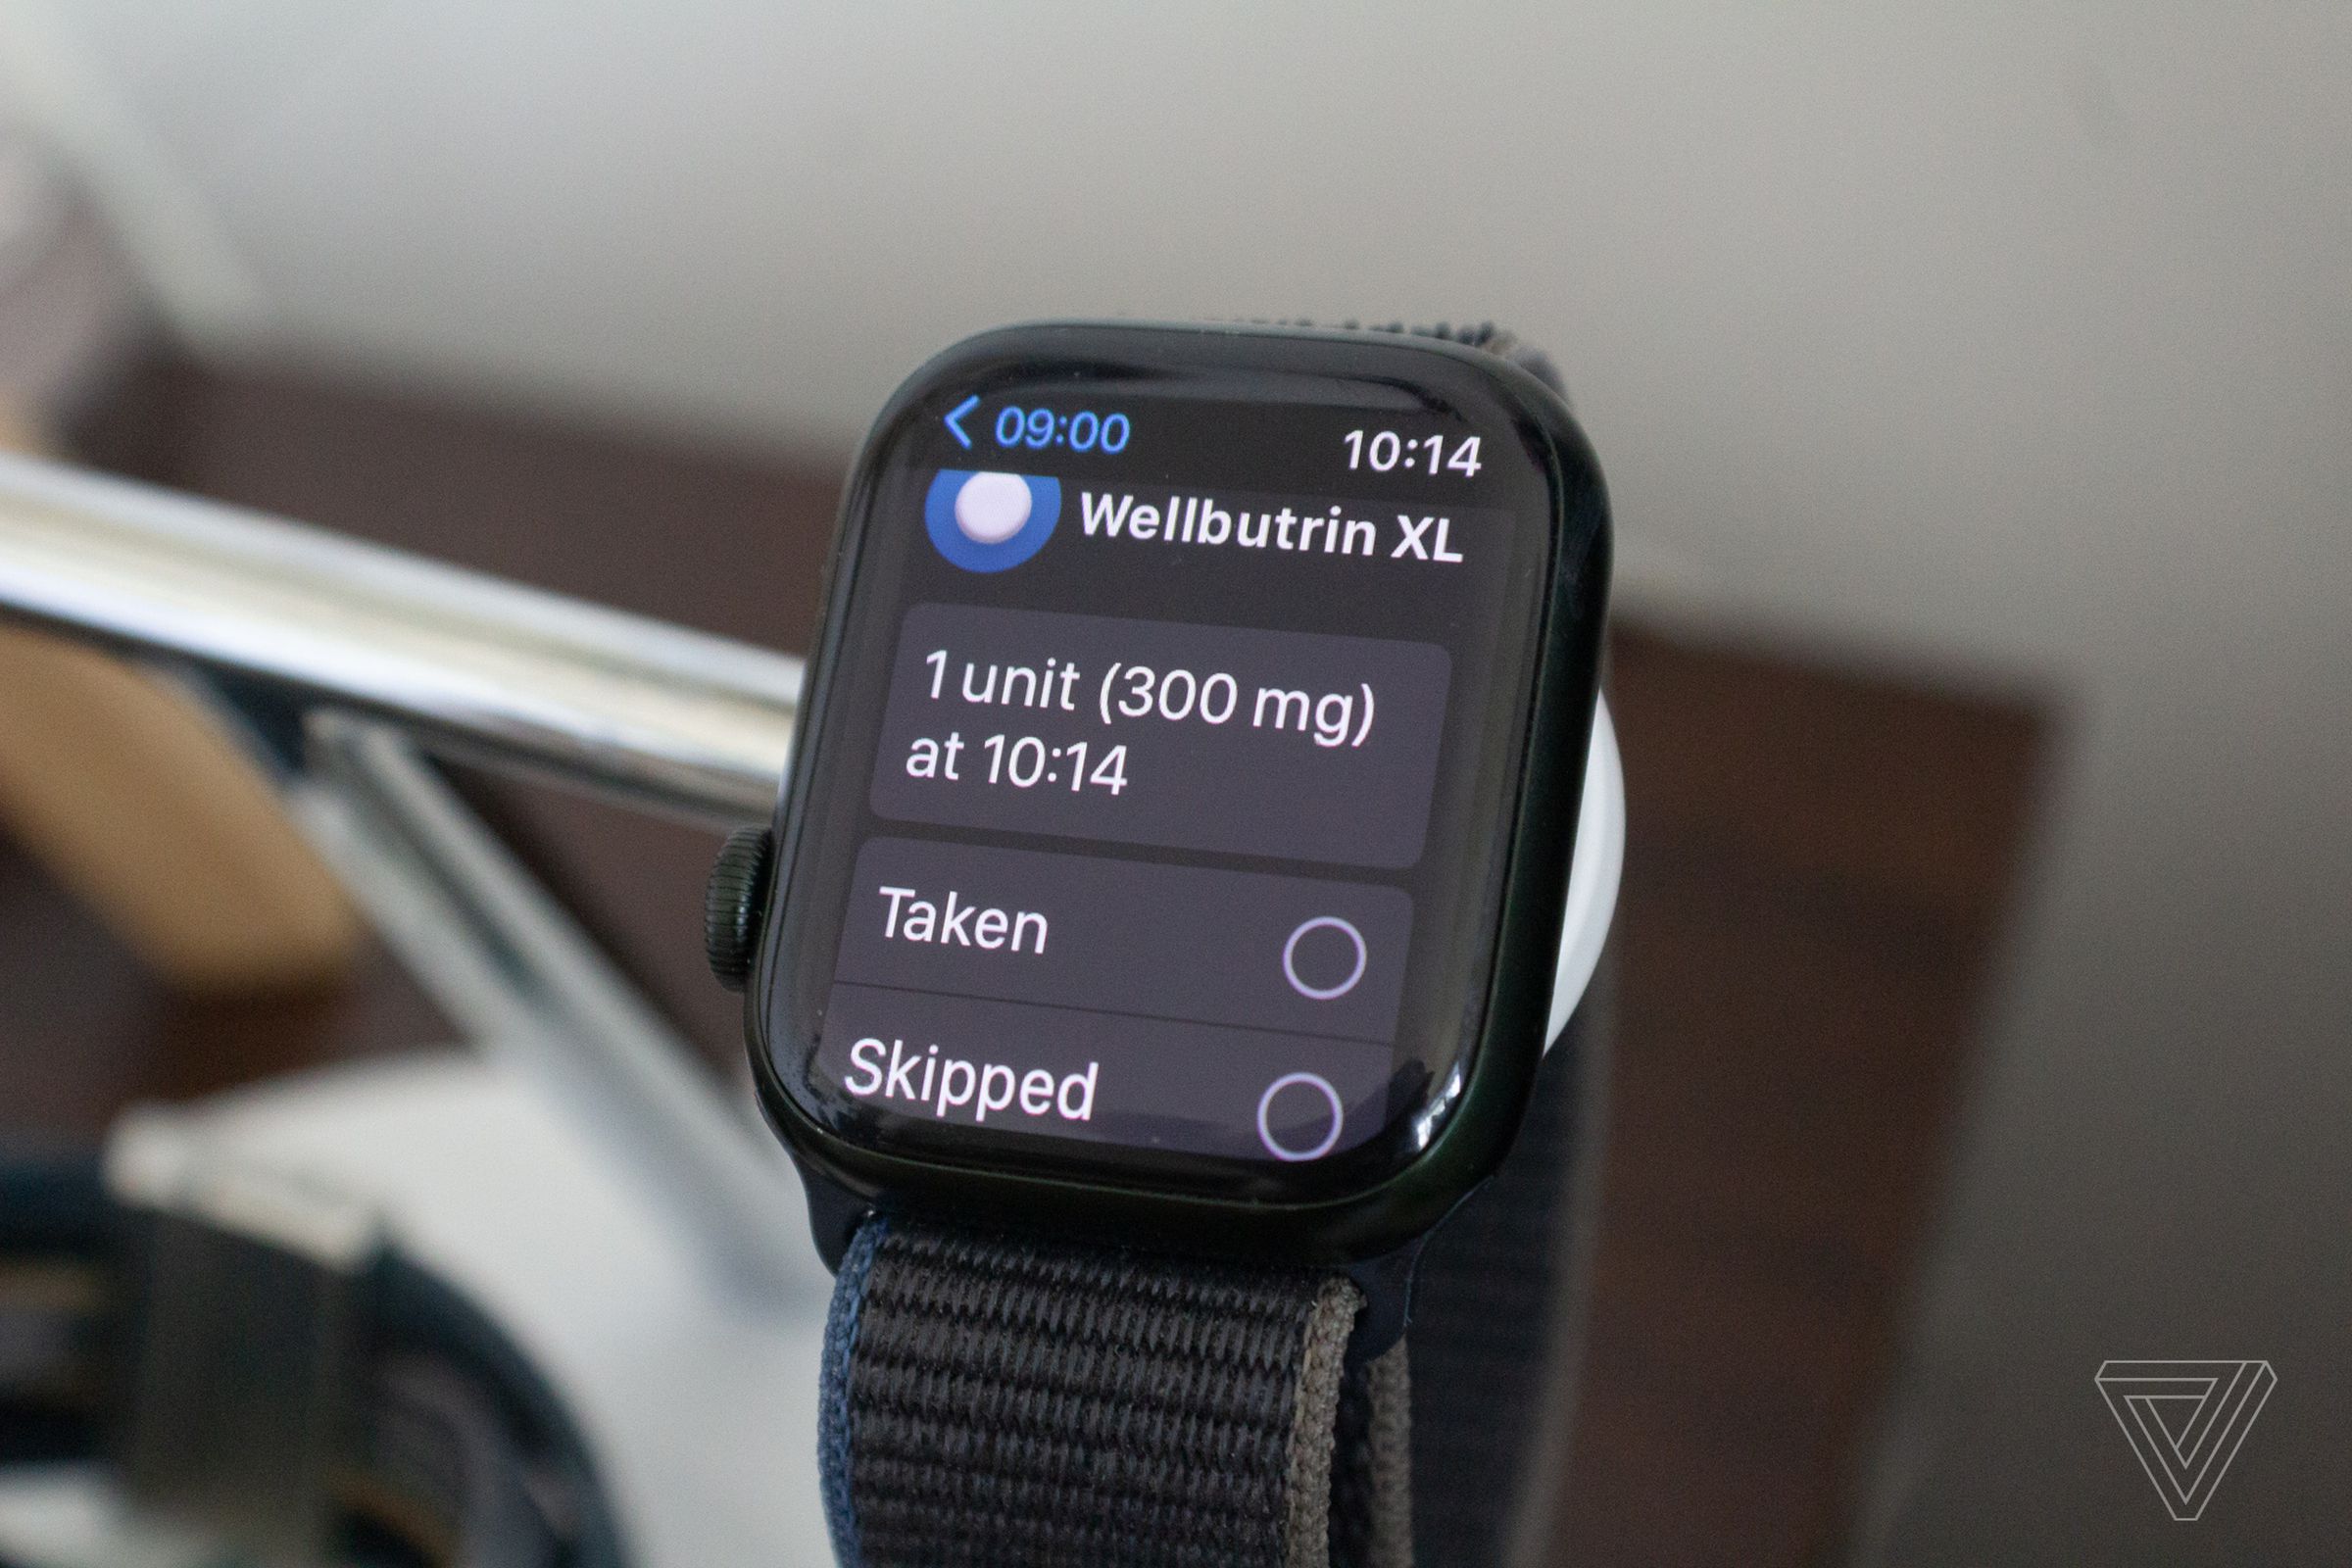 Medication logging screen shown on the Apple Watch Series 7